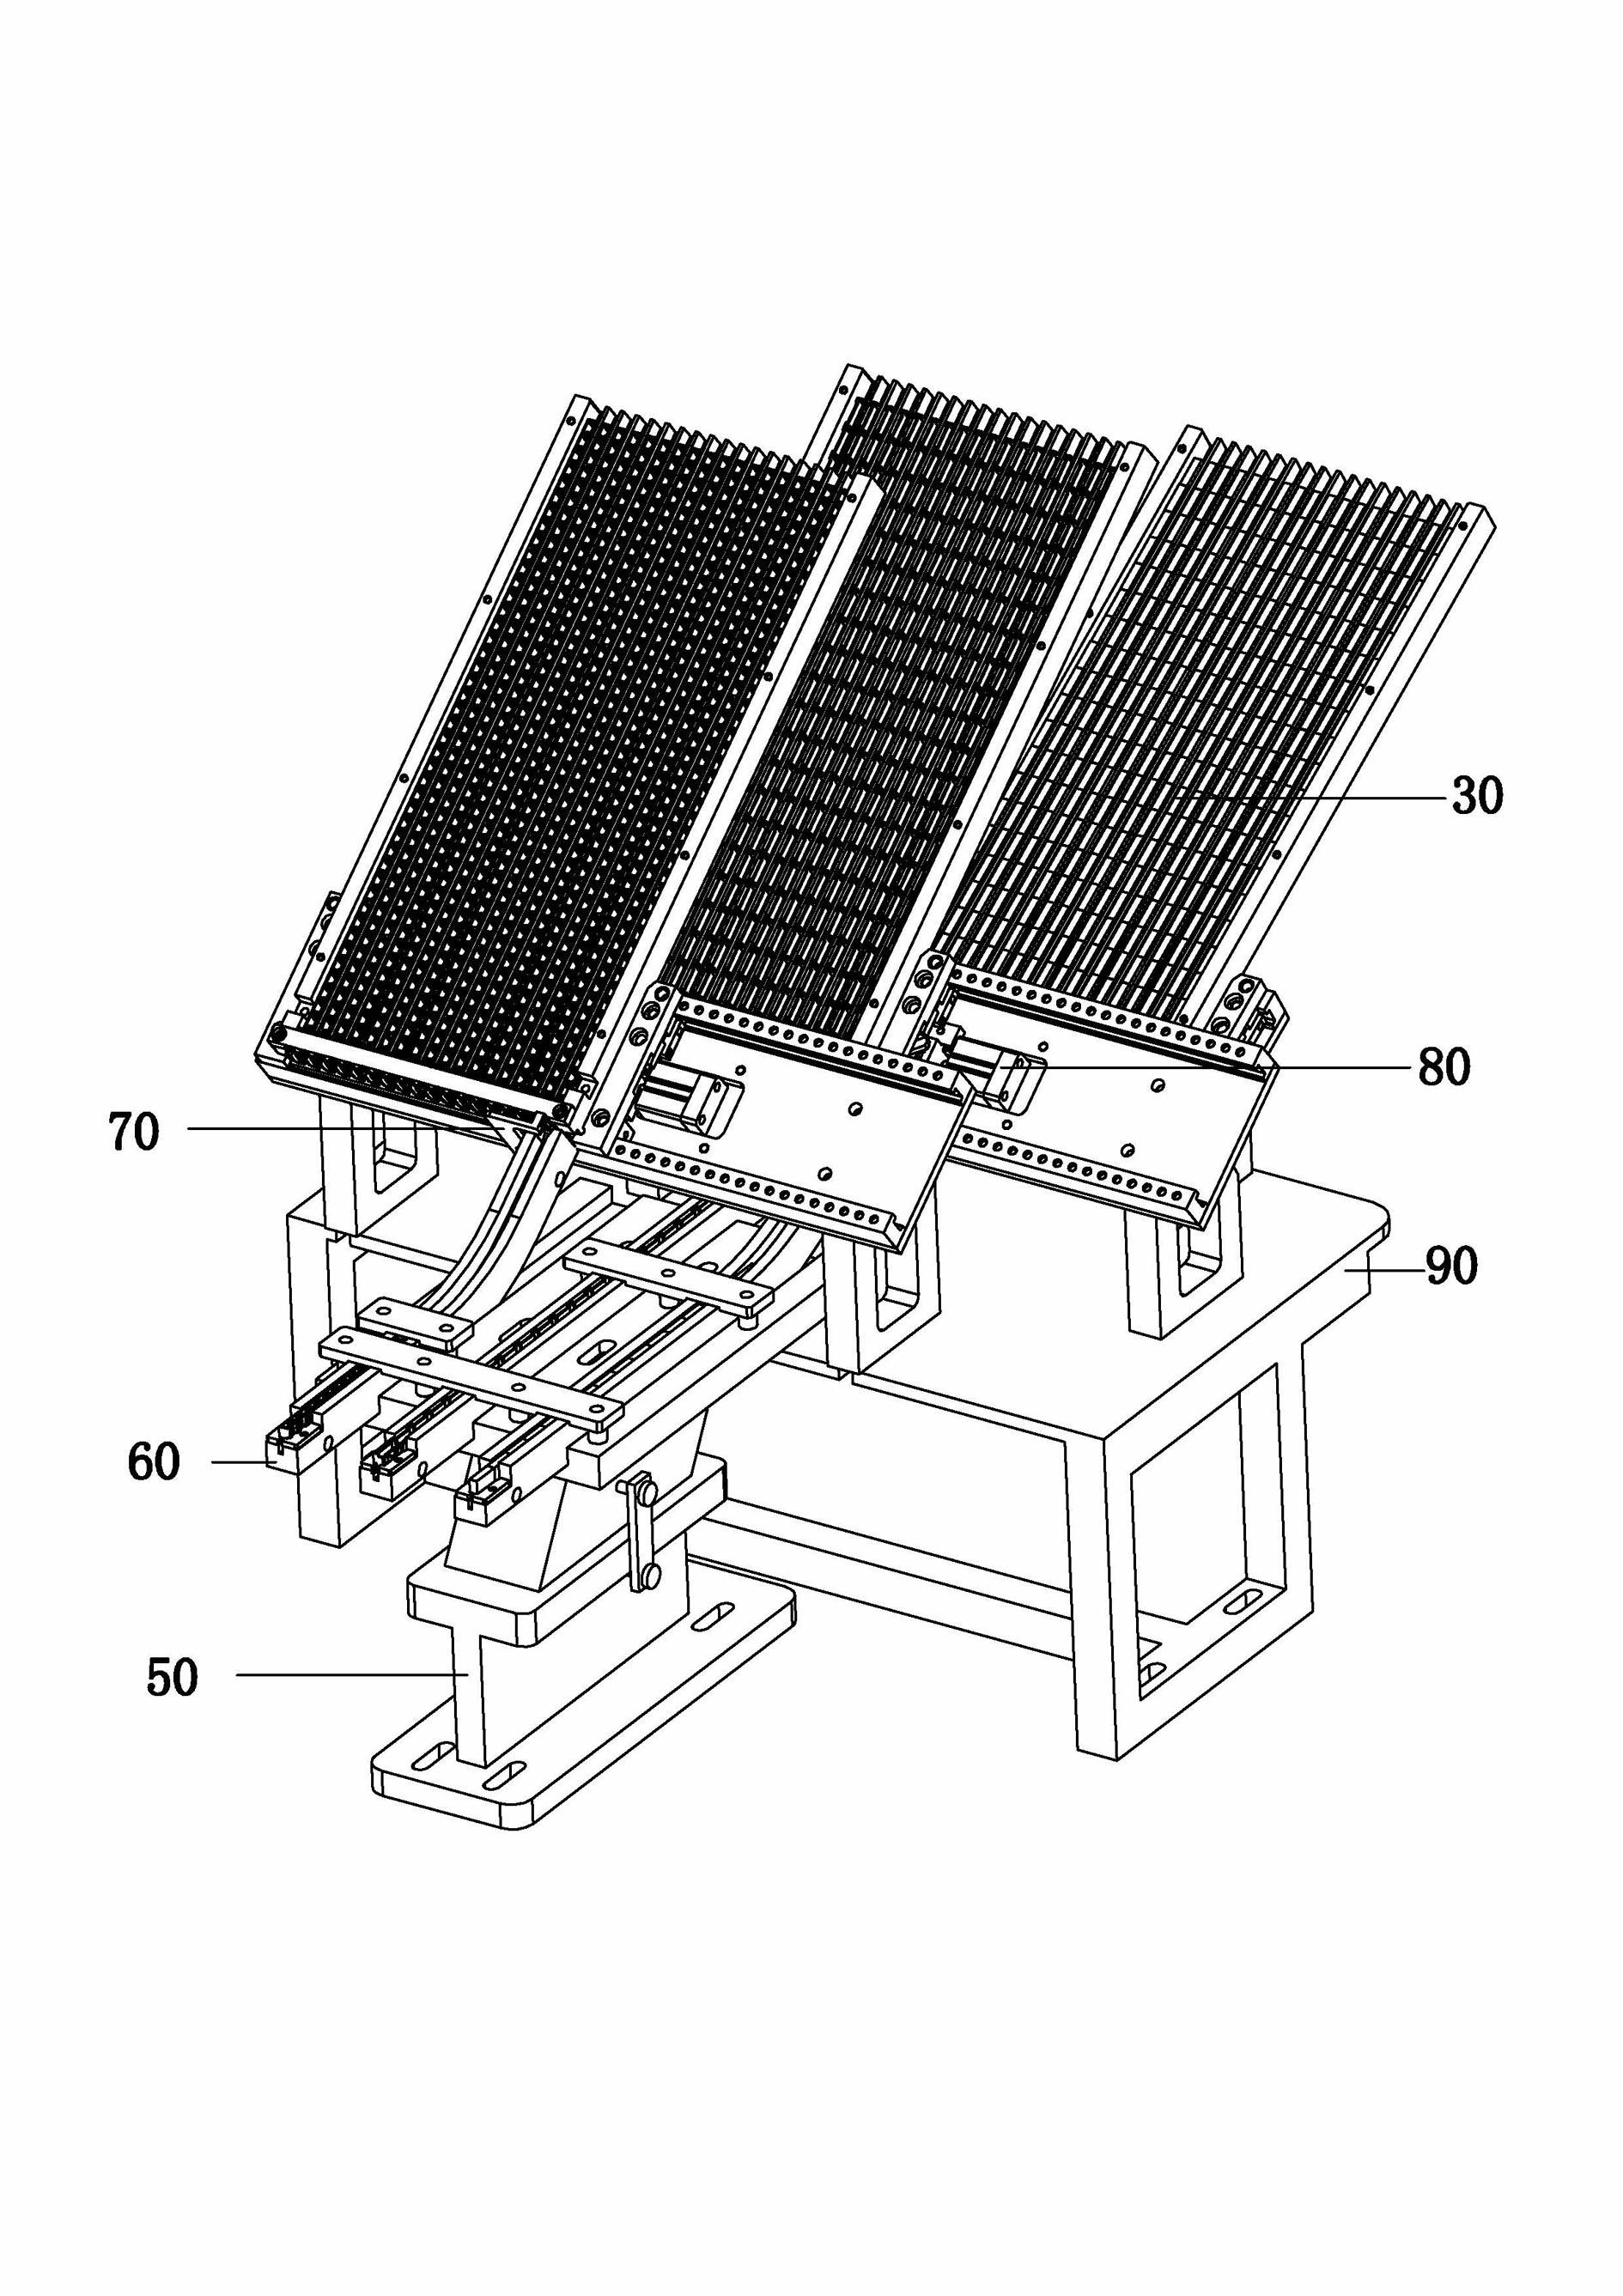 Feeding method capable of changing bulk material into tubed material